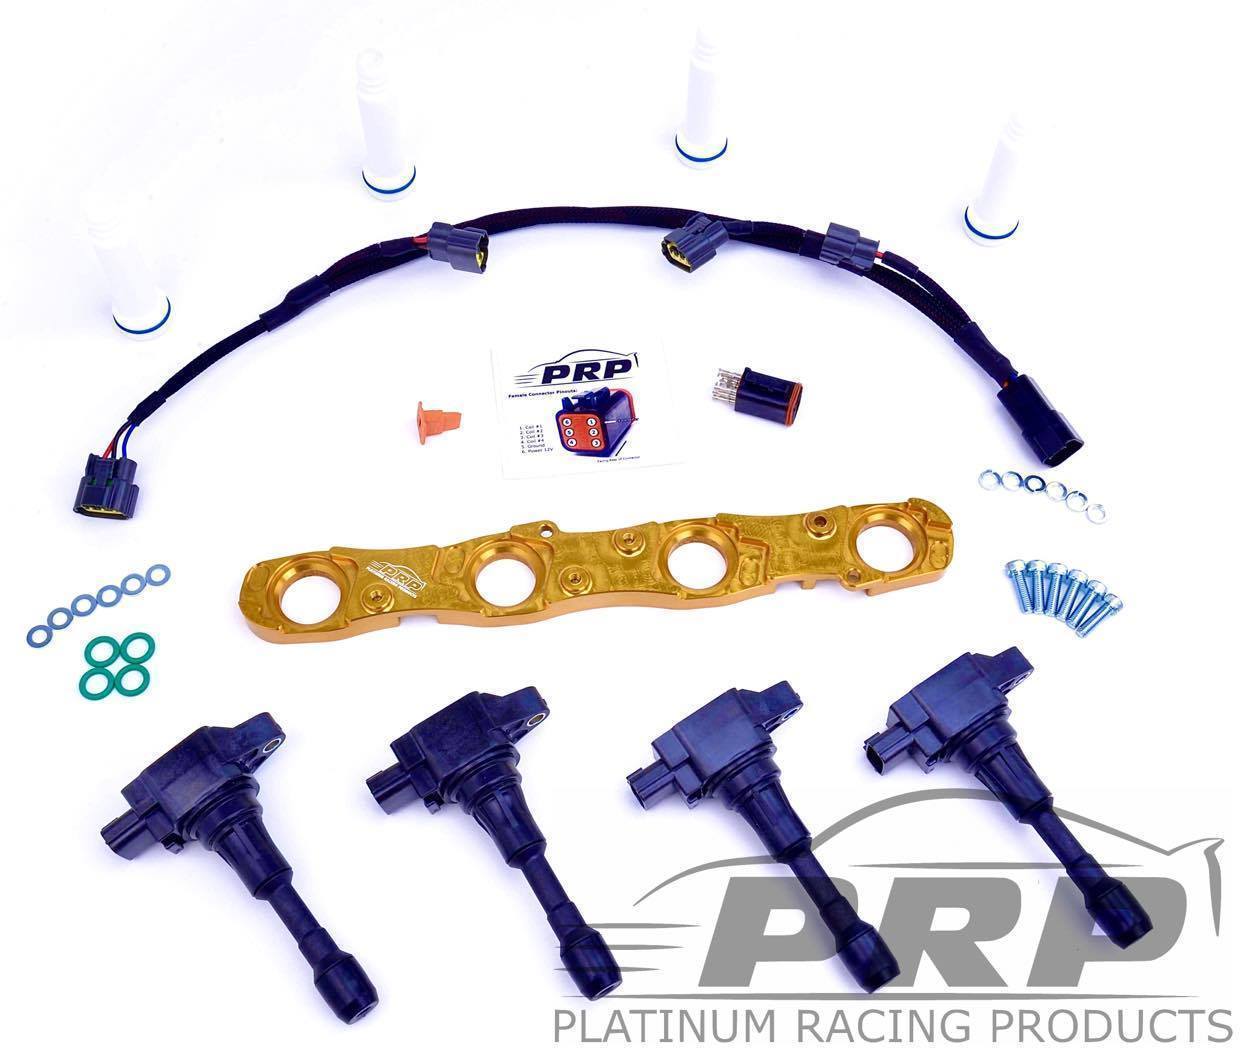 PLATINUM RACING PRODUCTS - EVO 4 - 9 VR38 SEQUENTIAL COIL KIT OPTIONS